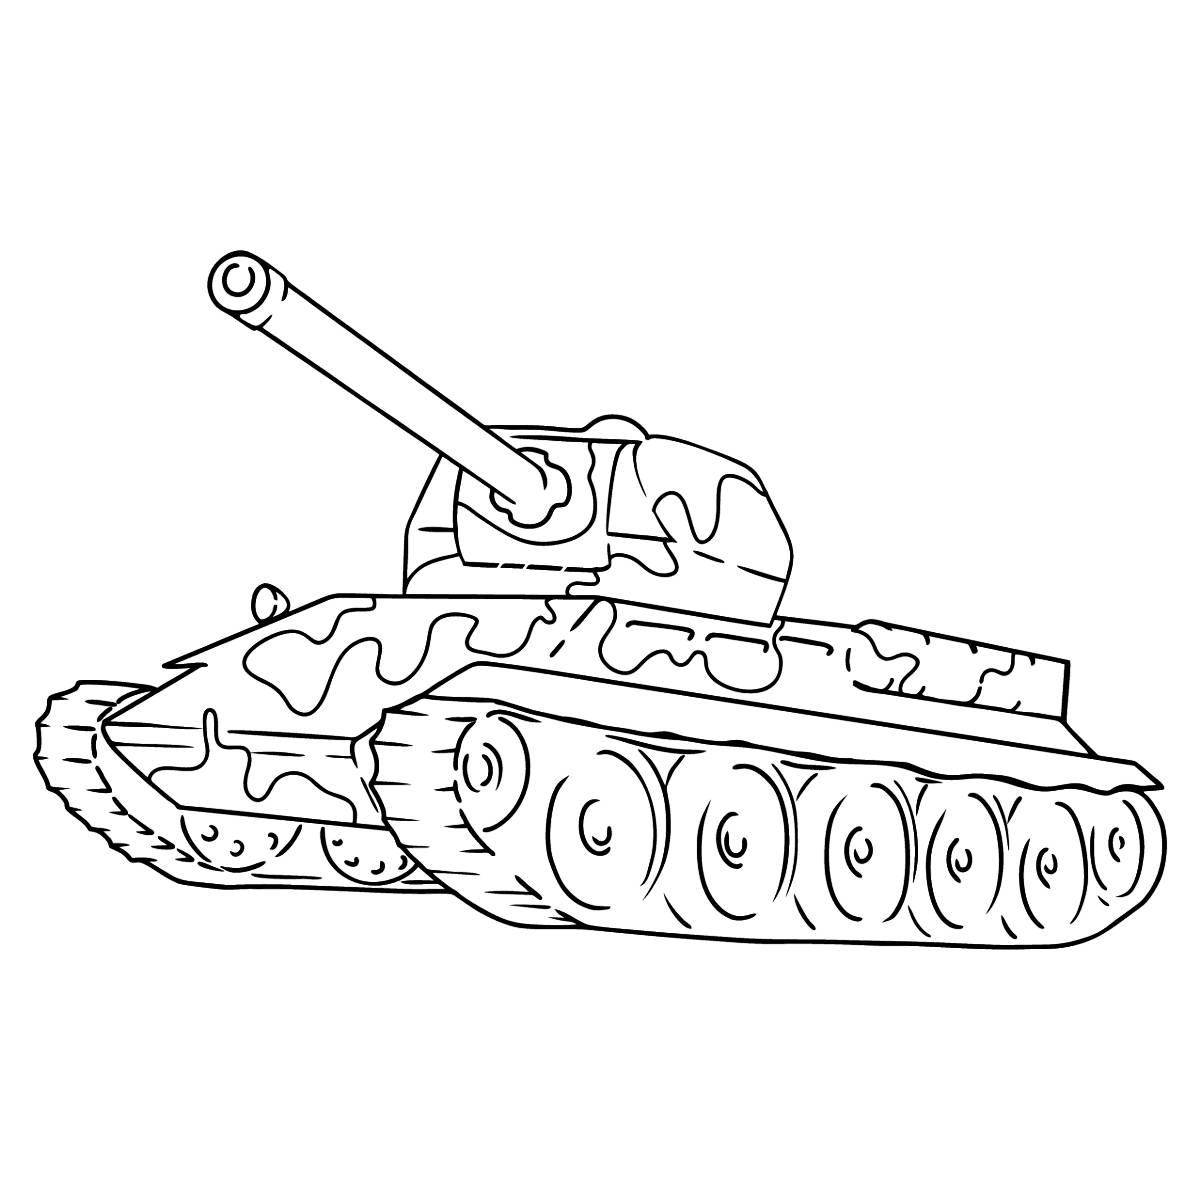 Intriguing coloring of the kv1 tank